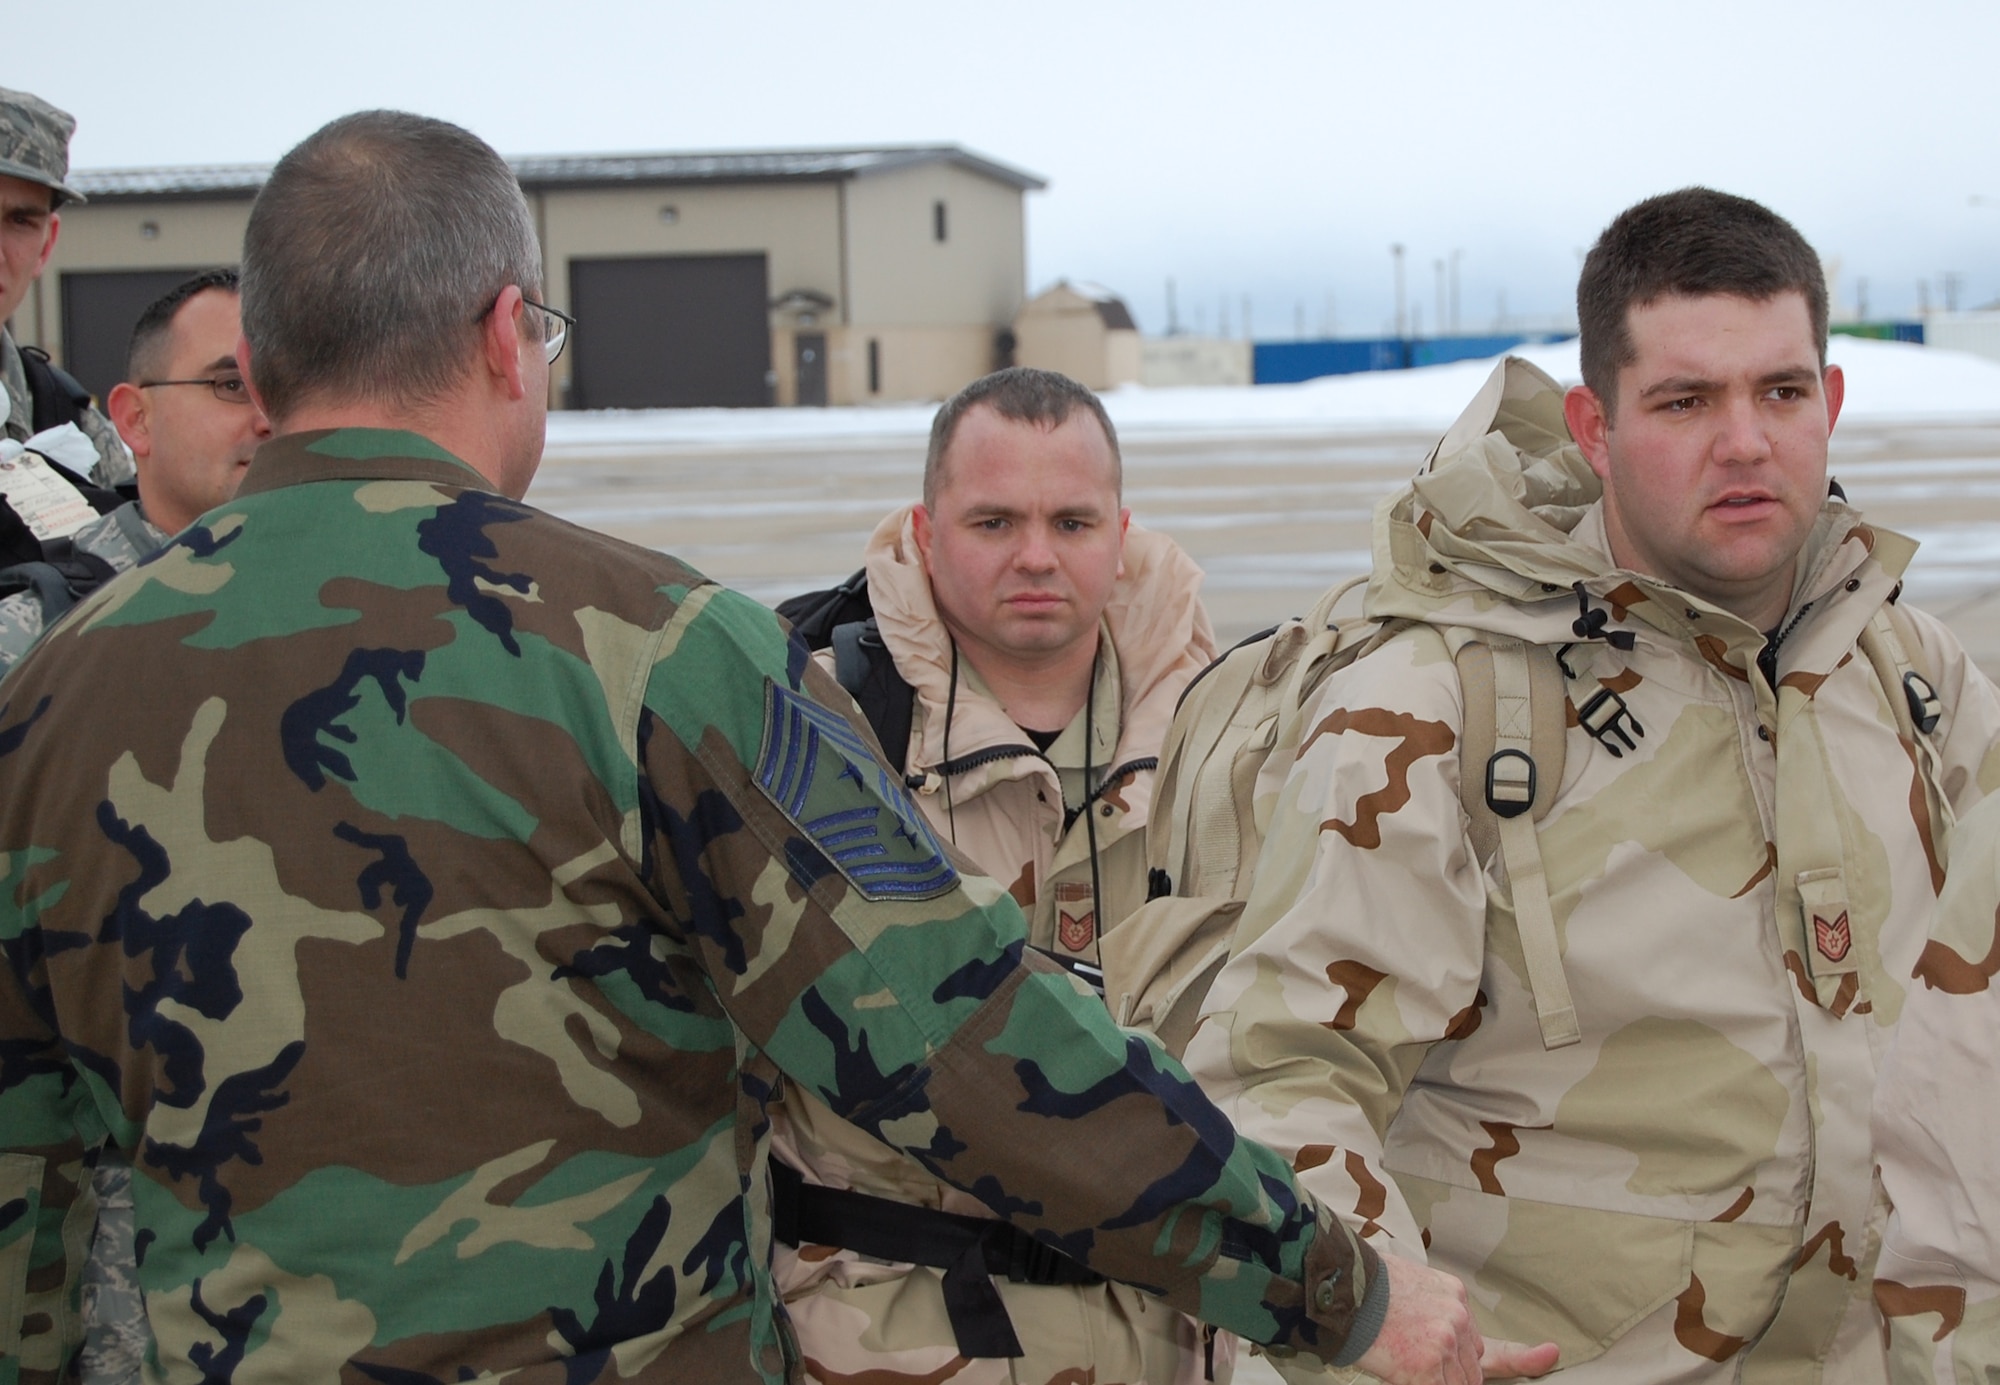 Chief Master Sgt. Ken Czop, 388th command chief master sergeant, shakes hands with 421st Fighter Squadron Airmen as they deploy in support of Operation Iraqi Freedom.  During their time in the Central Command area of operations, the squadron will maintain security and stability in the region by providing close air support to coalition ground forces.  (U.S. Air Force photo by Ralph Jackson)